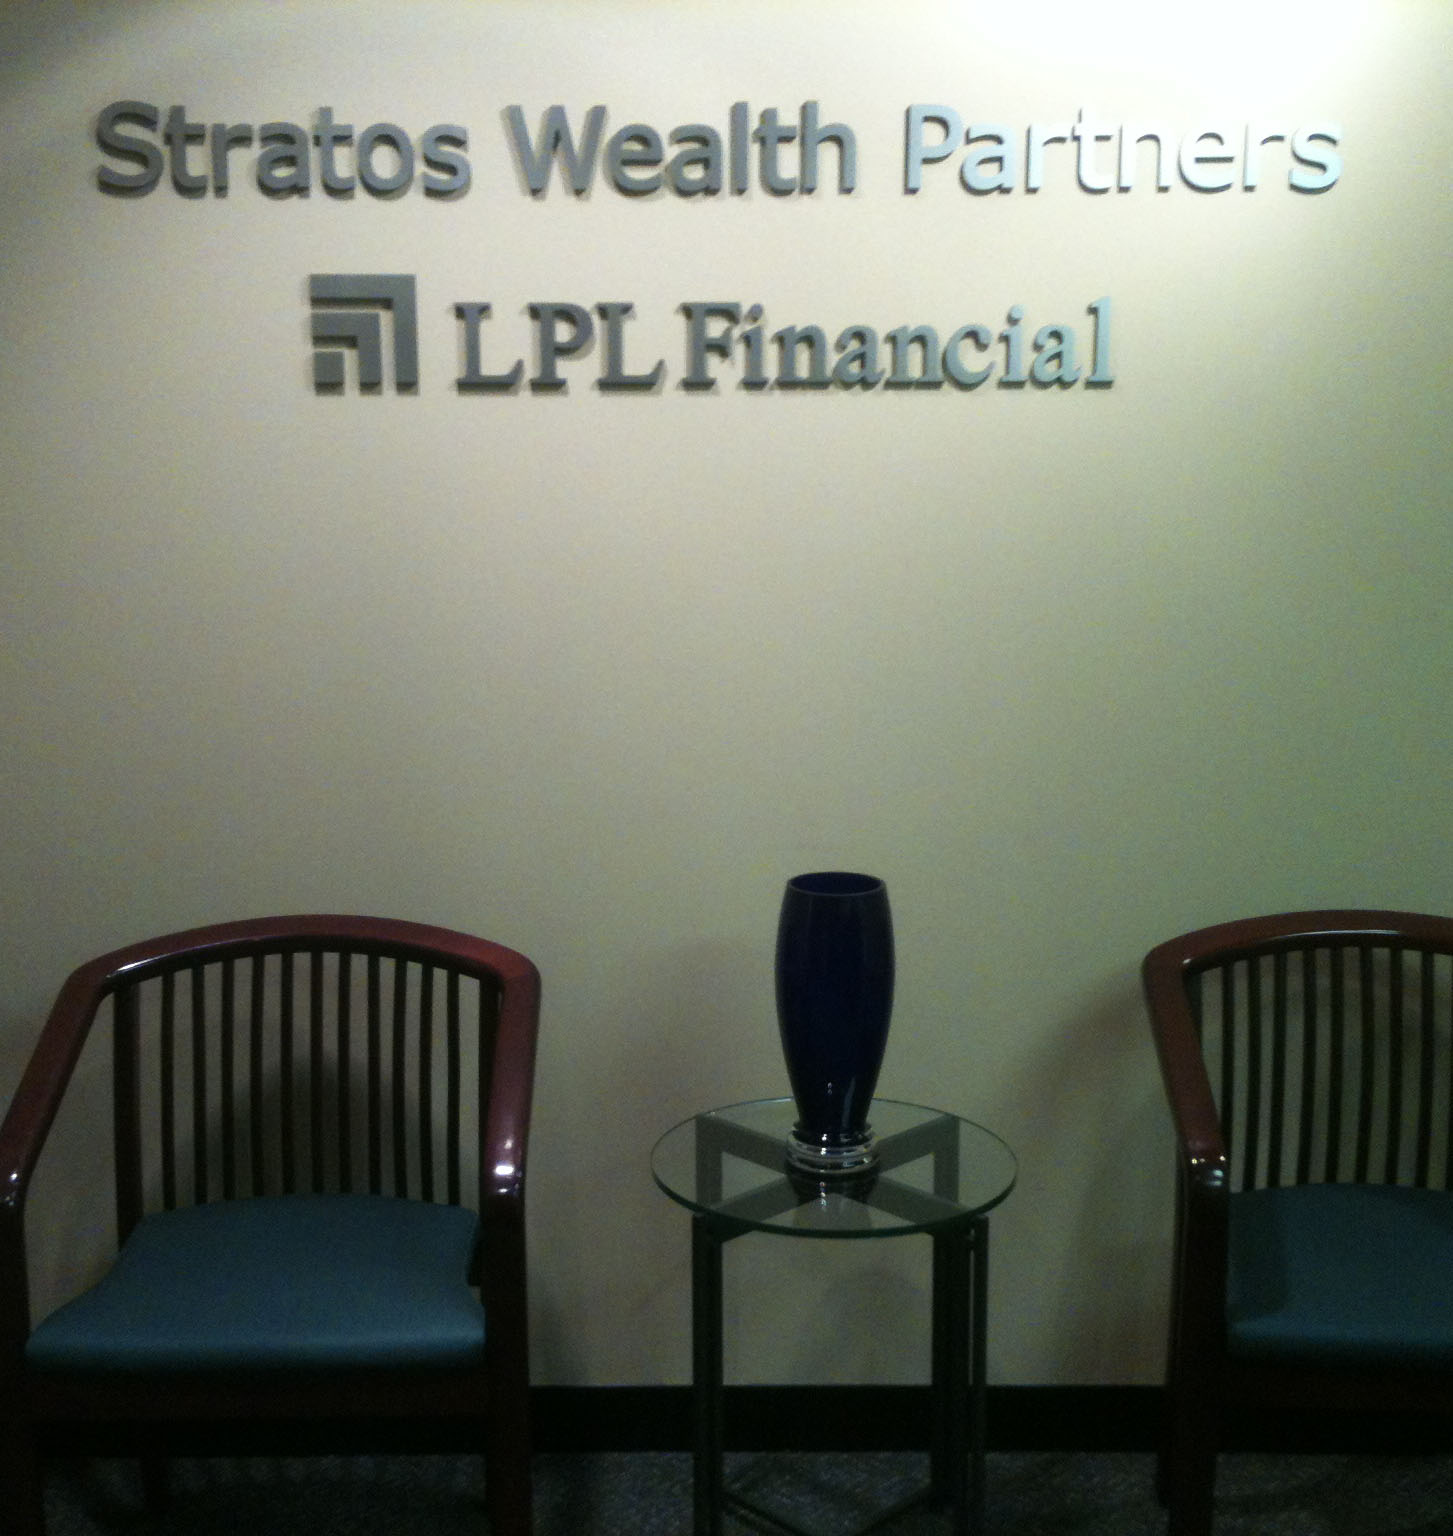 Dimensional Letters (Non-Illuminated) for the Stratos Wealth Partners LPL Financial company